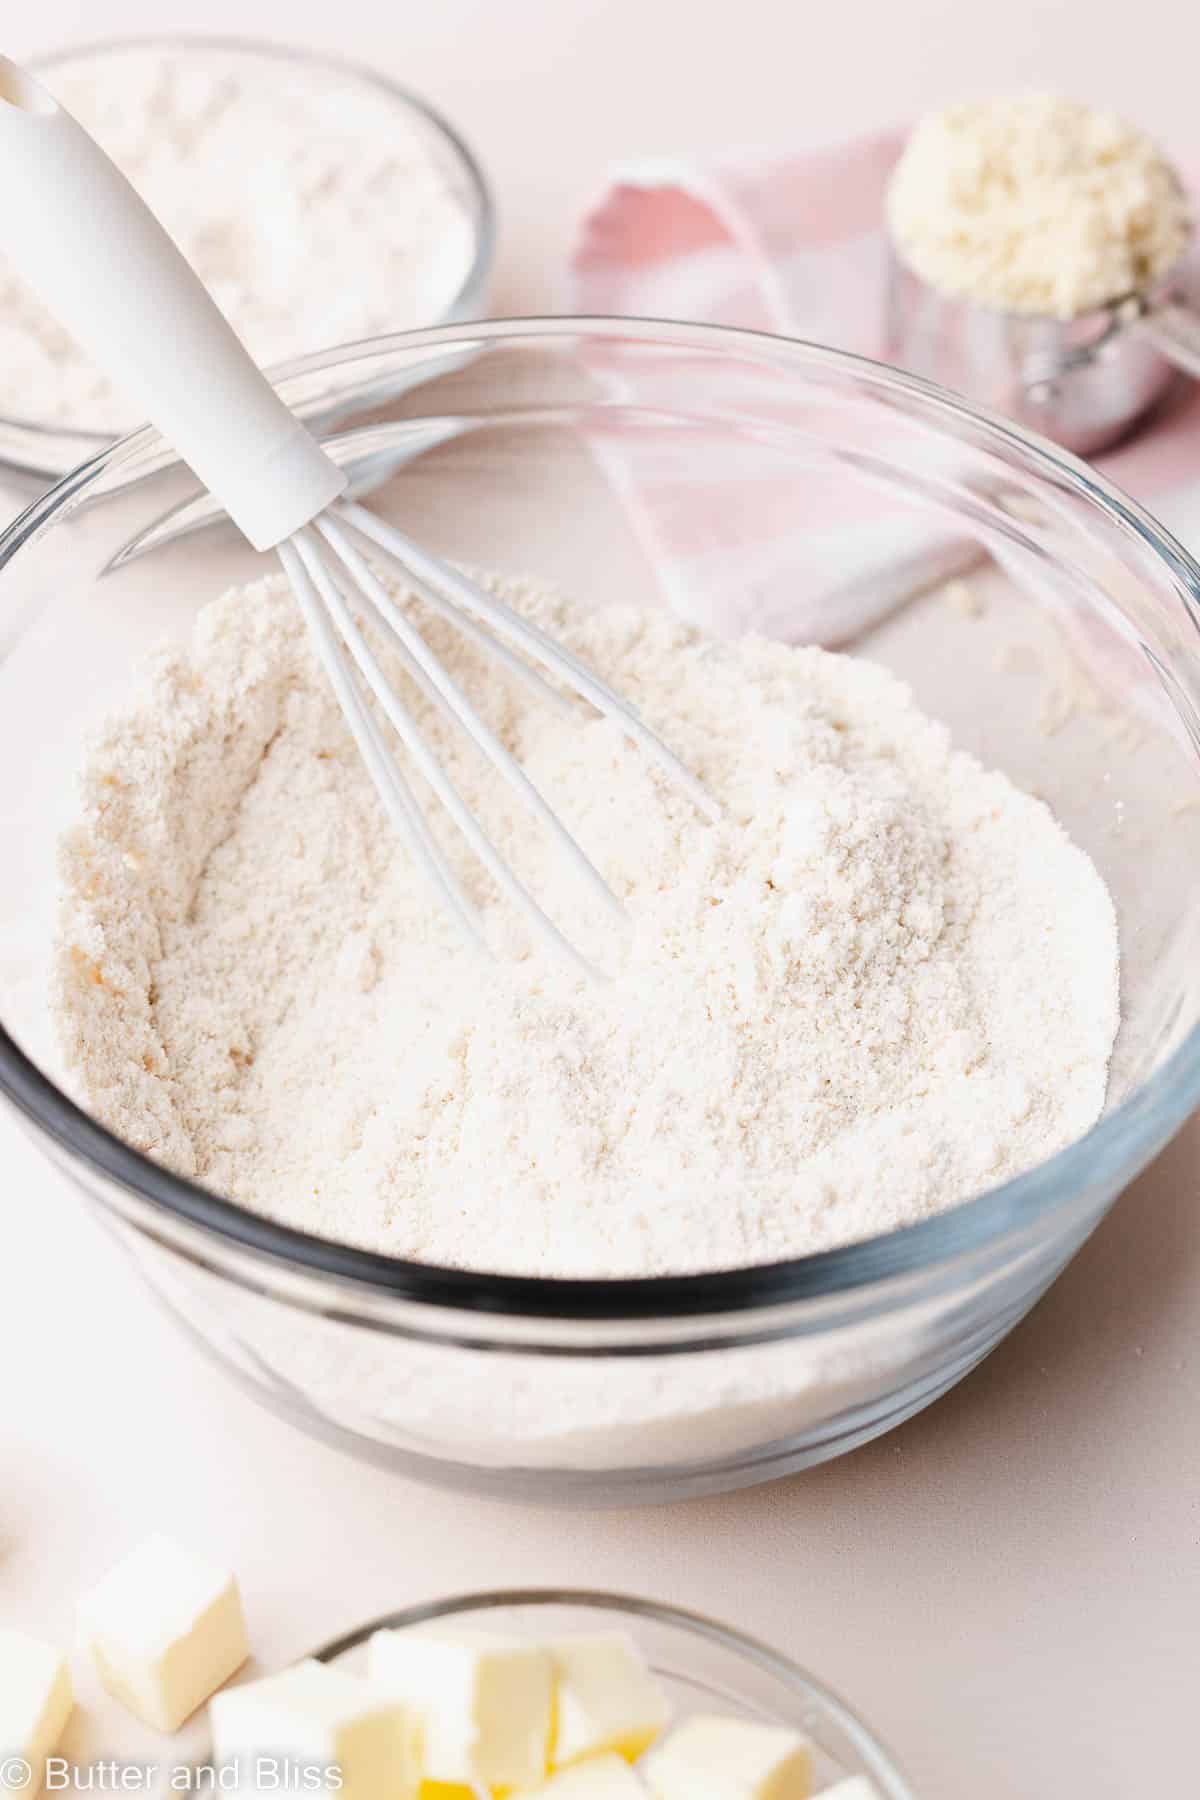 Bowl of gluten free flour mix with a white whisk.